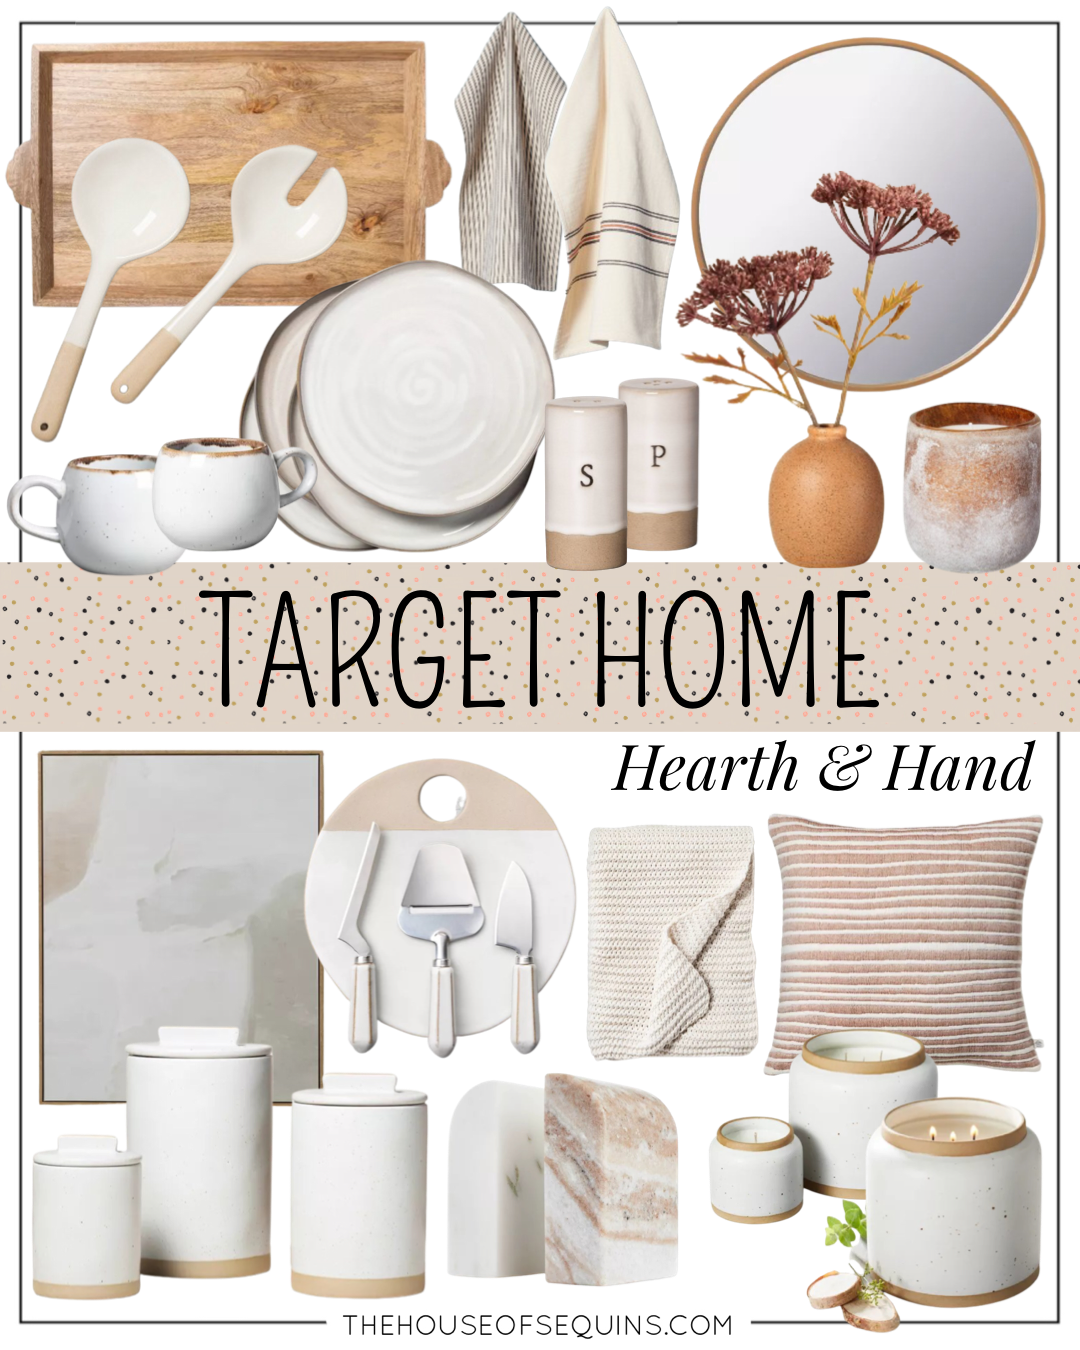 Blogger Sarah Lindner of The House of Sequins sharing Fall decor from Target Home.